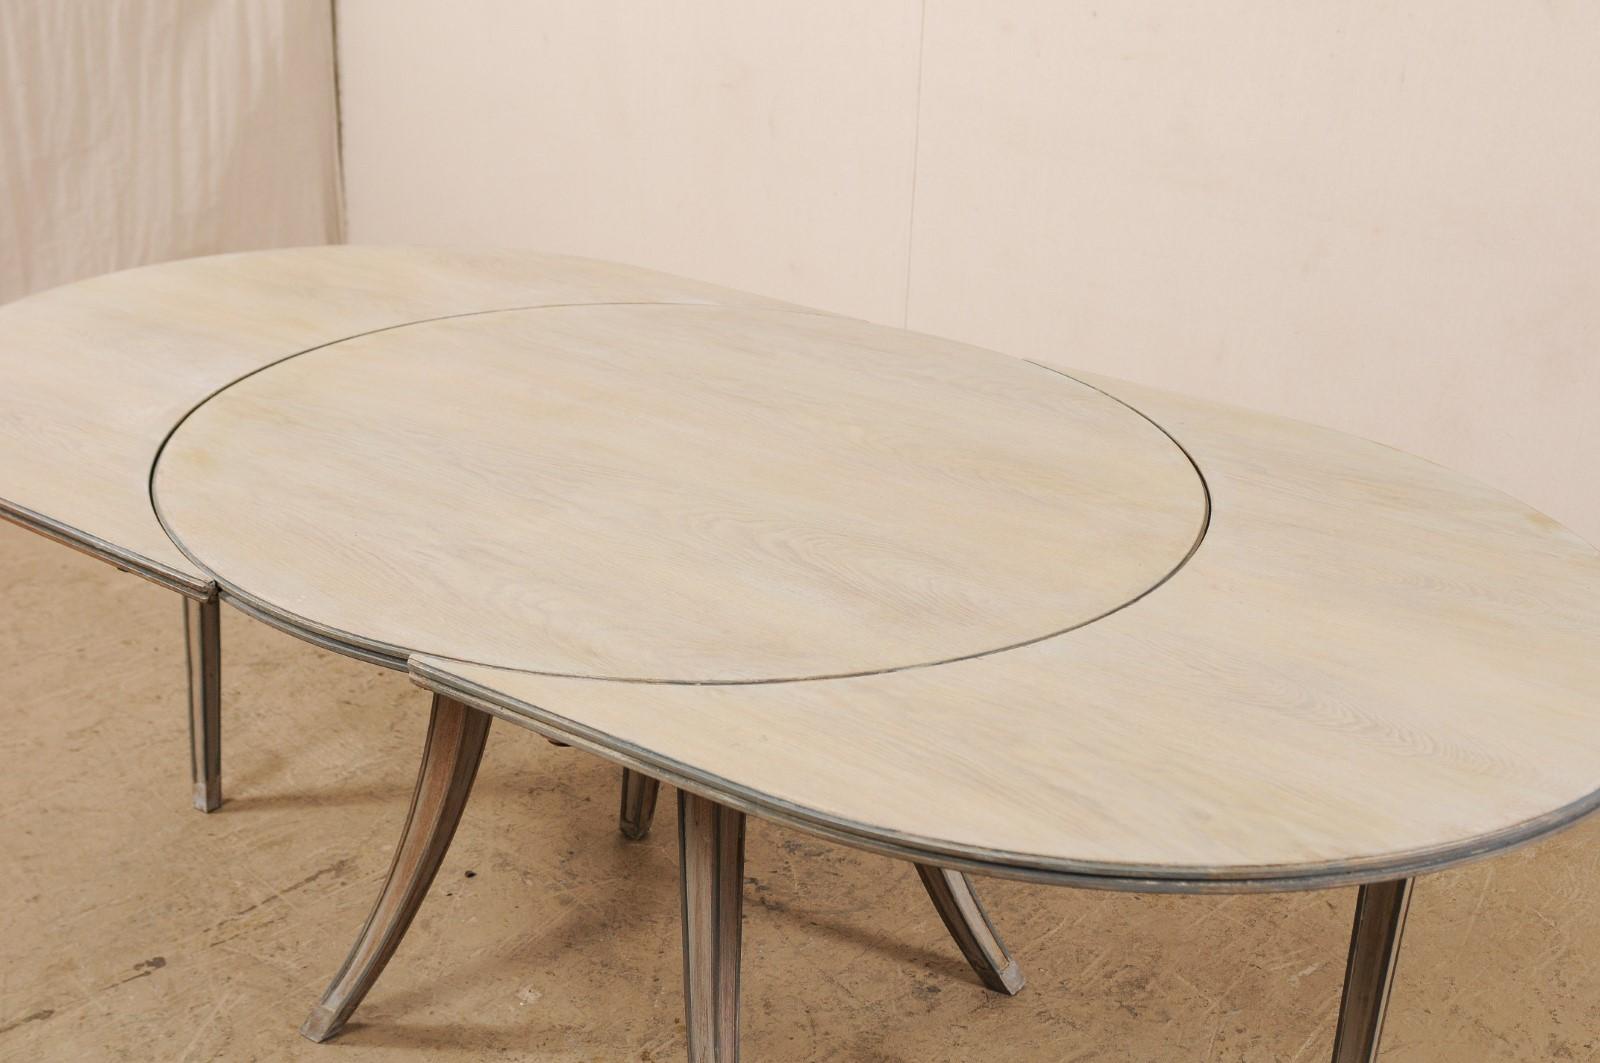 Carved French Mid-century Modern Dining or Center Table, Transitions from Oval to Round